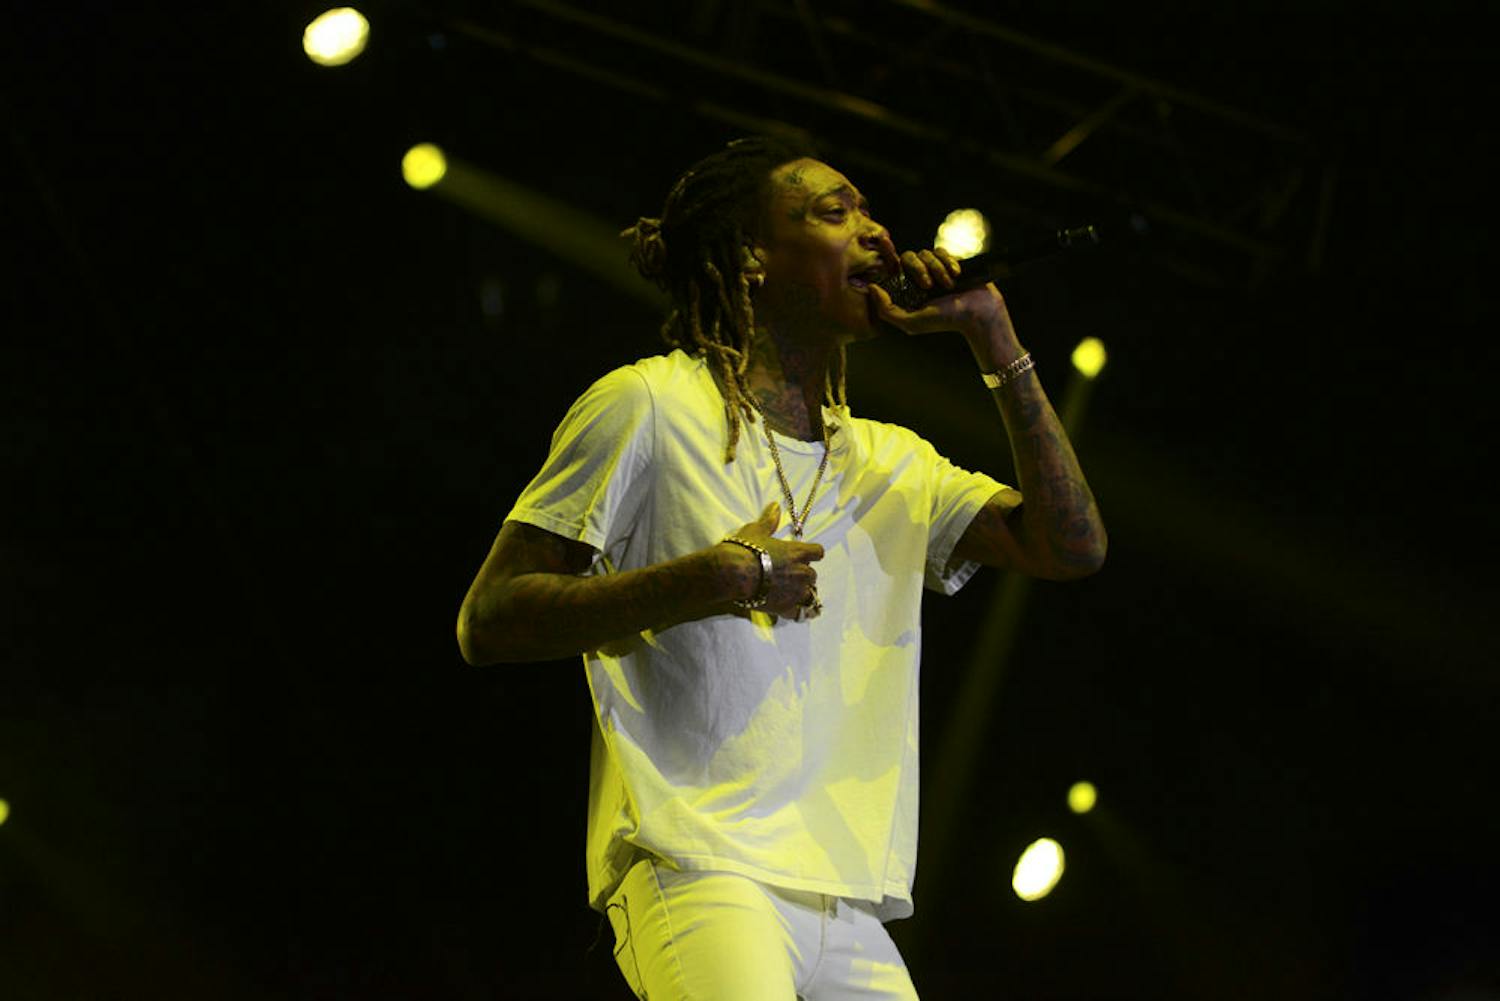 Rapper Wiz Khalifa performs his hit song, "Black and Yellow," to a sold-out crowd in the Stephen C. O'Connell Center on Feb. 11, 2016.